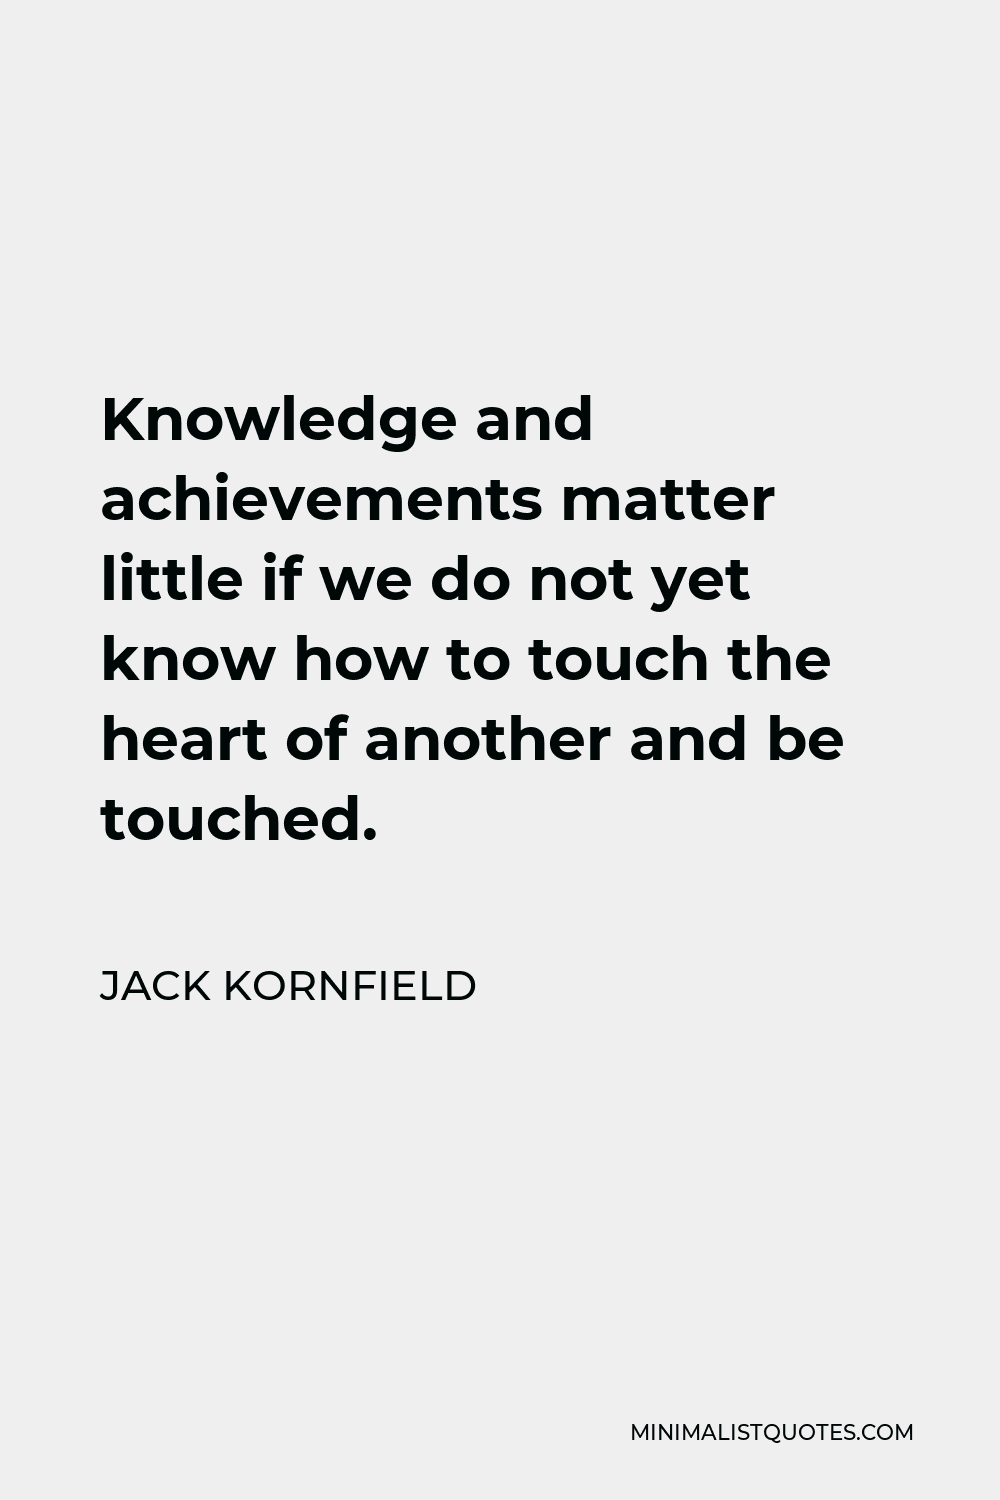 Jack Kornfield Quote - Knowledge and achievements matter little if we do not yet know how to touch the heart of another and be touched.